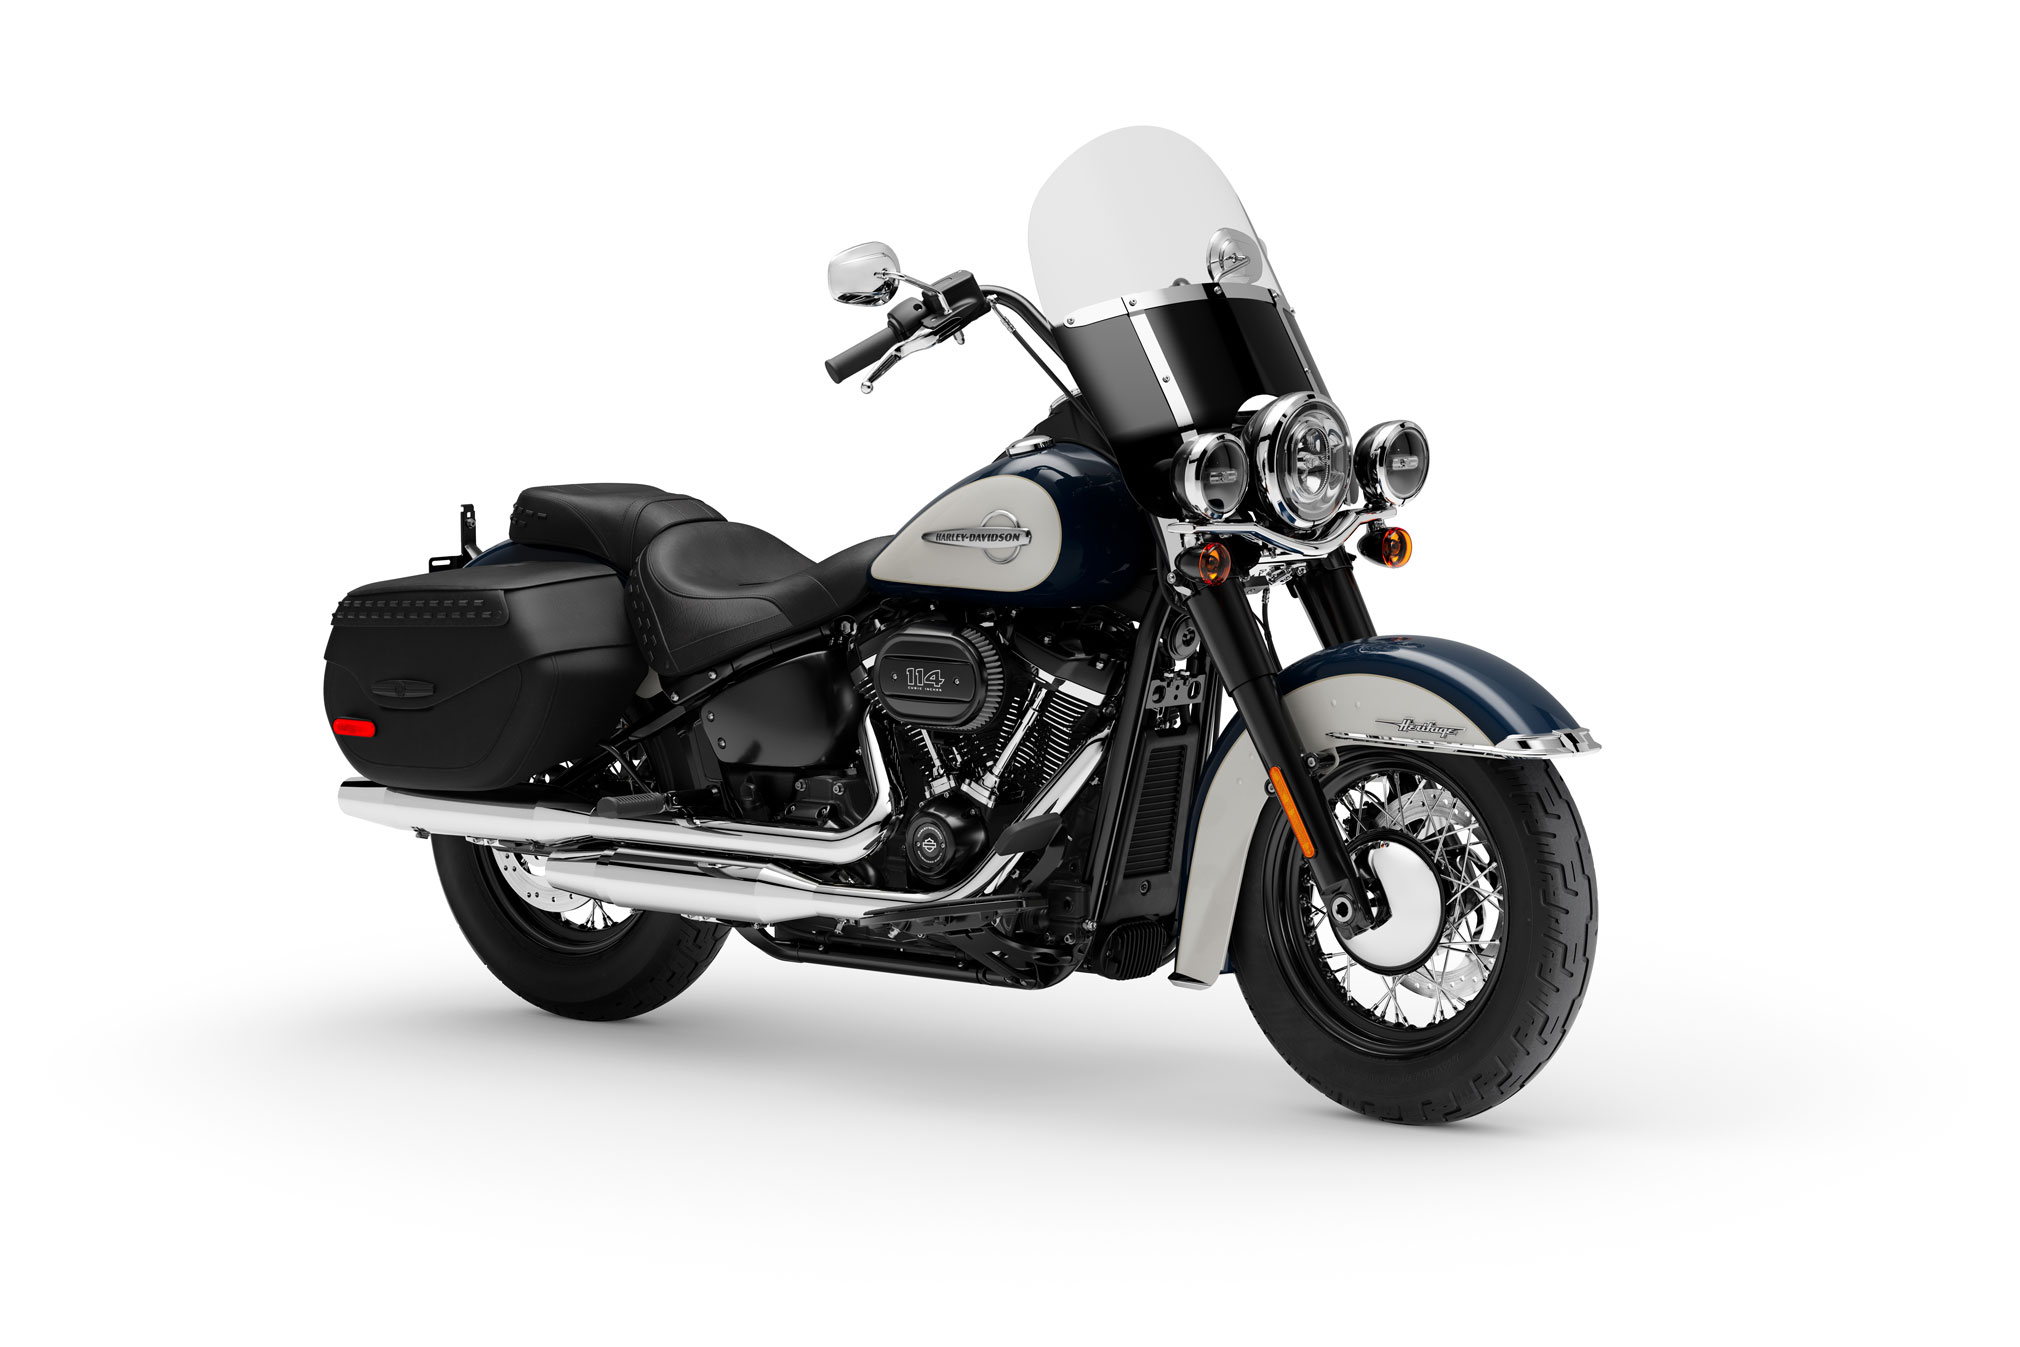 2020 Harley Davidson Heritage Classic Restyling Revealed First Look